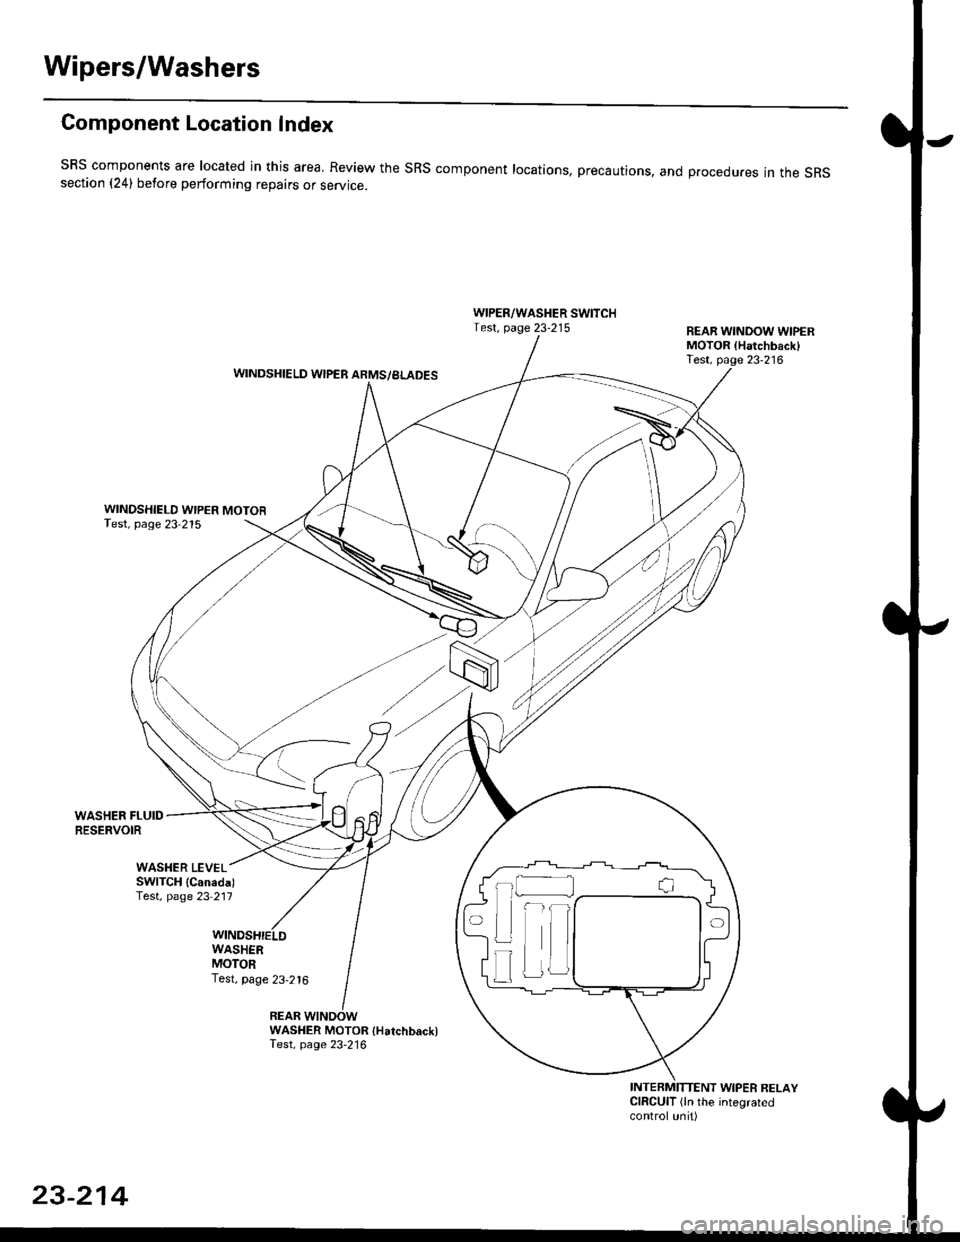 HONDA CIVIC 1998 6.G User Guide Wipers/Washers
Component Location Index
SBS components are located in this area, Review the SRS component locations, precautions, and procedures in the SRSsection (241 betore performing repairs or ser